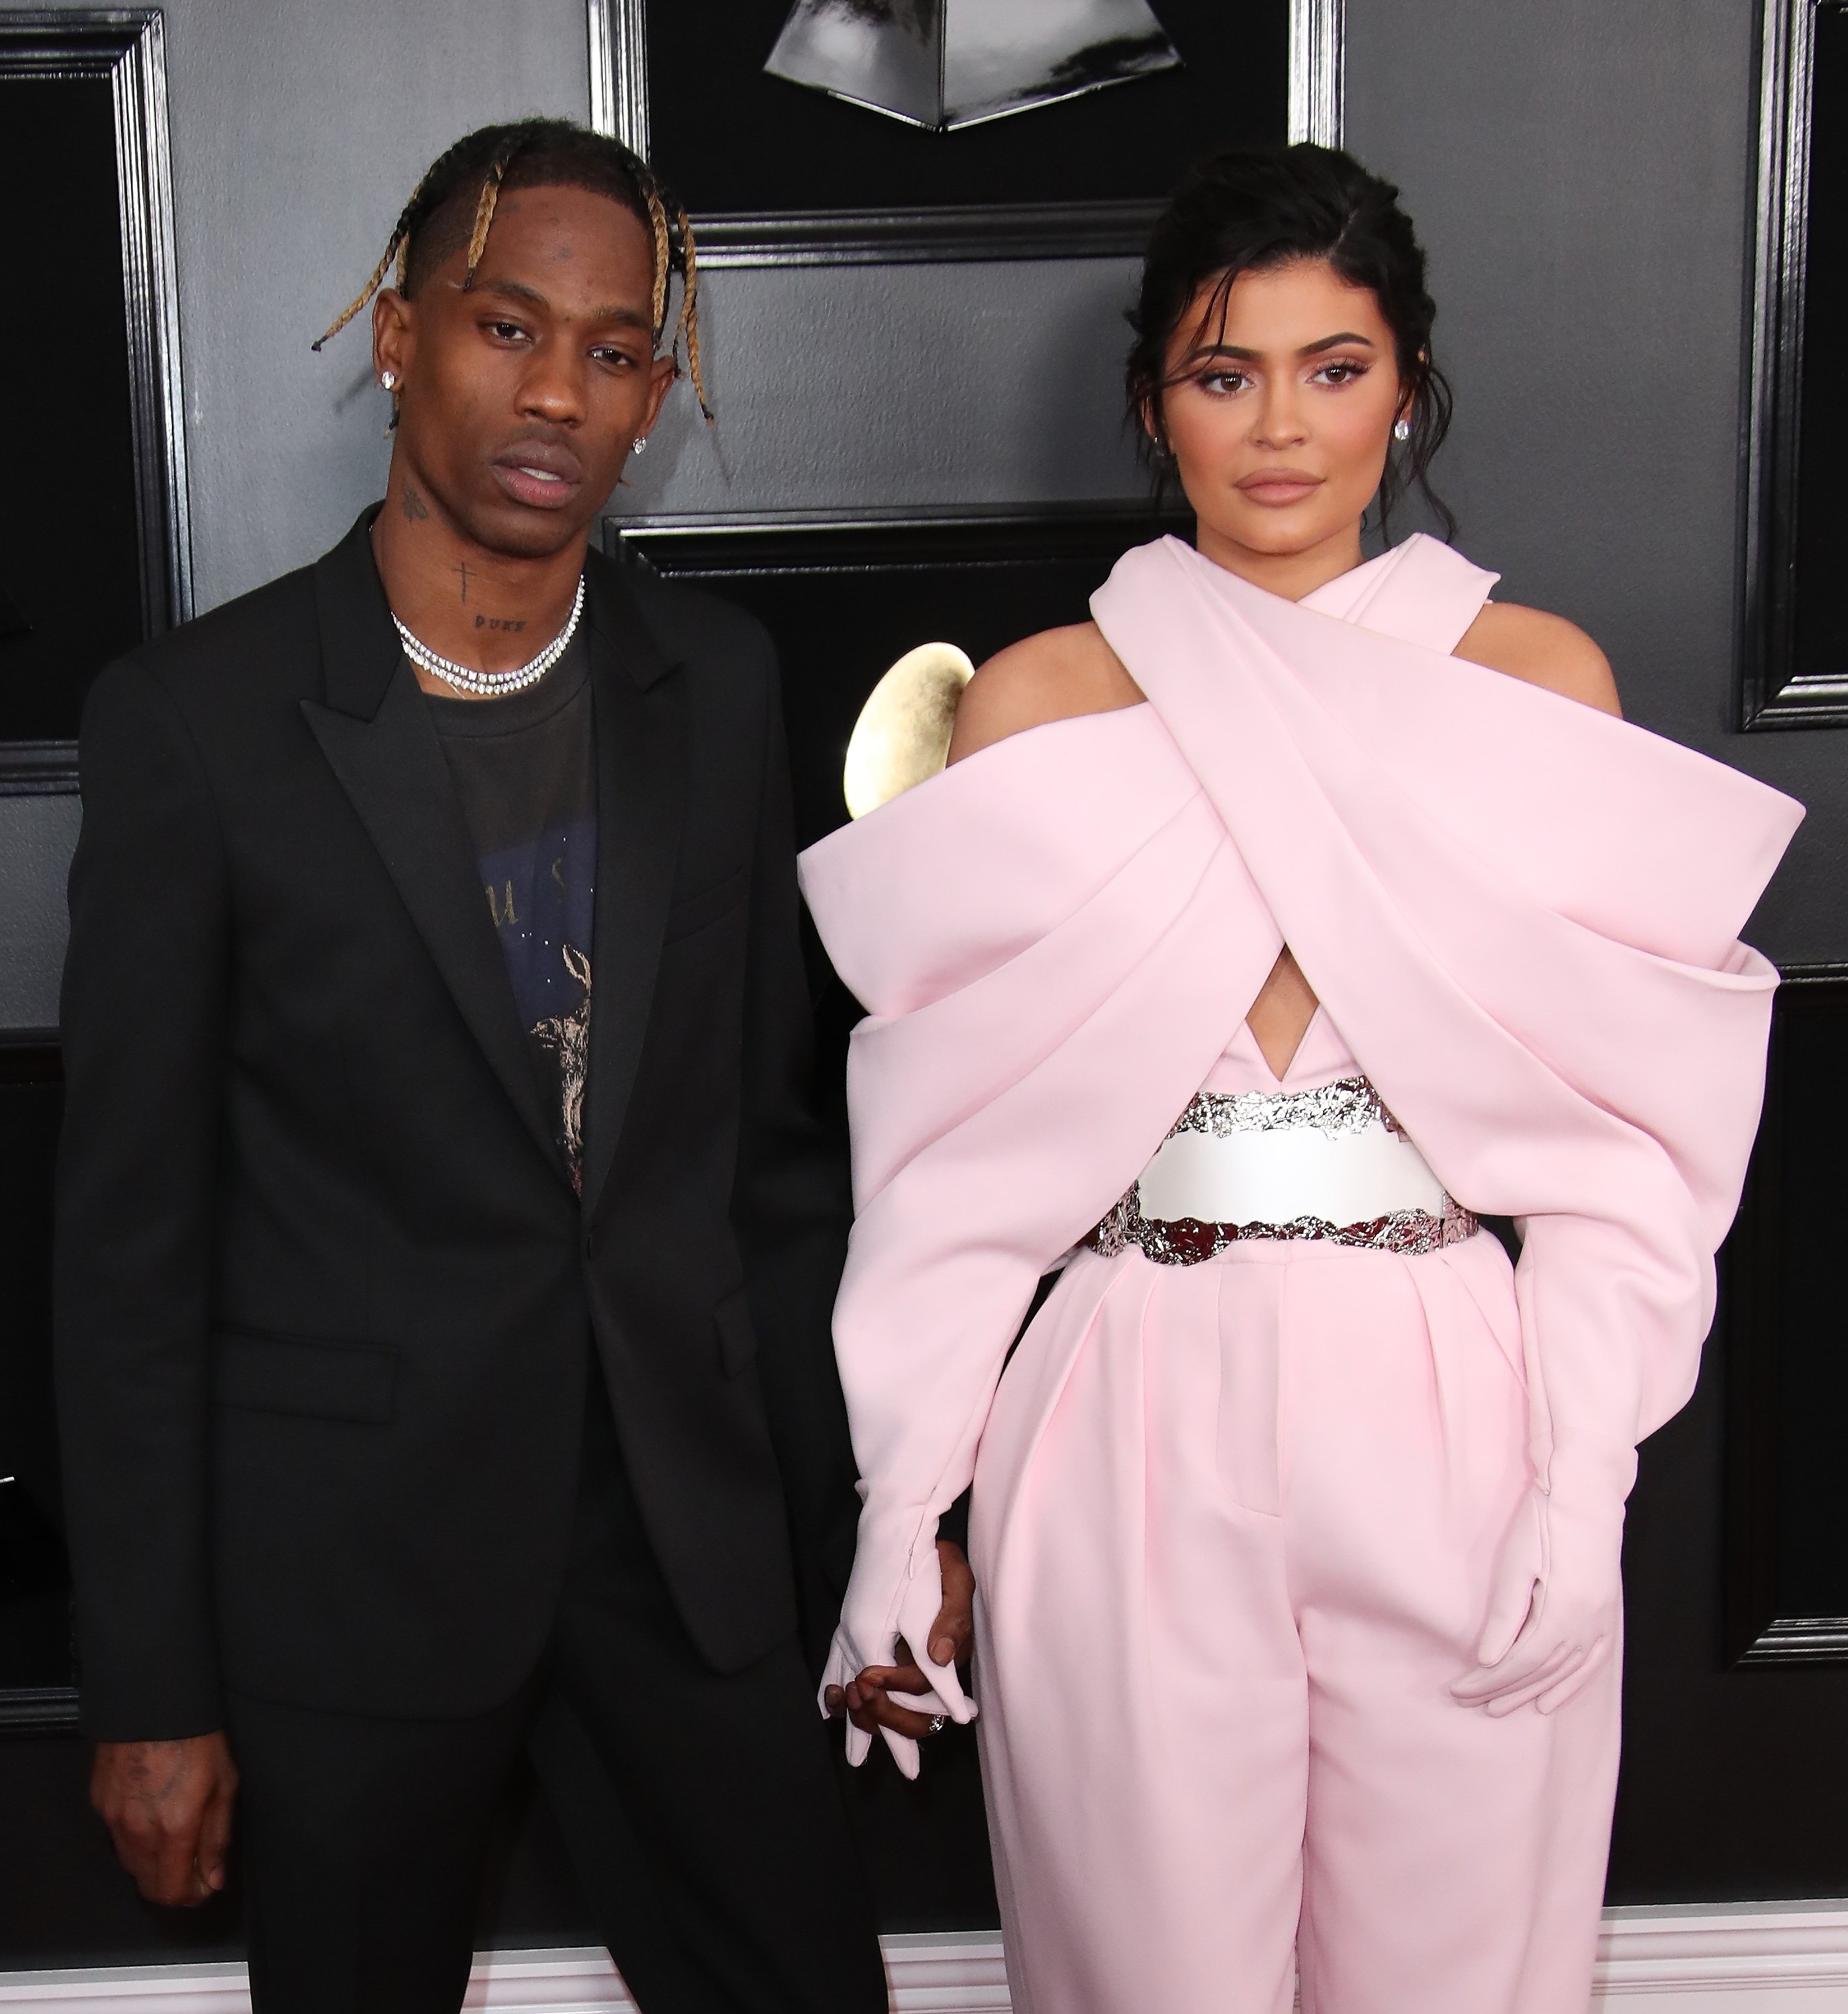 Travis Scott and Kylie Jenner at the 61st Annual Grammy Awards on February 10, 2019, in Los Angeles, California. | Source: Getty Images